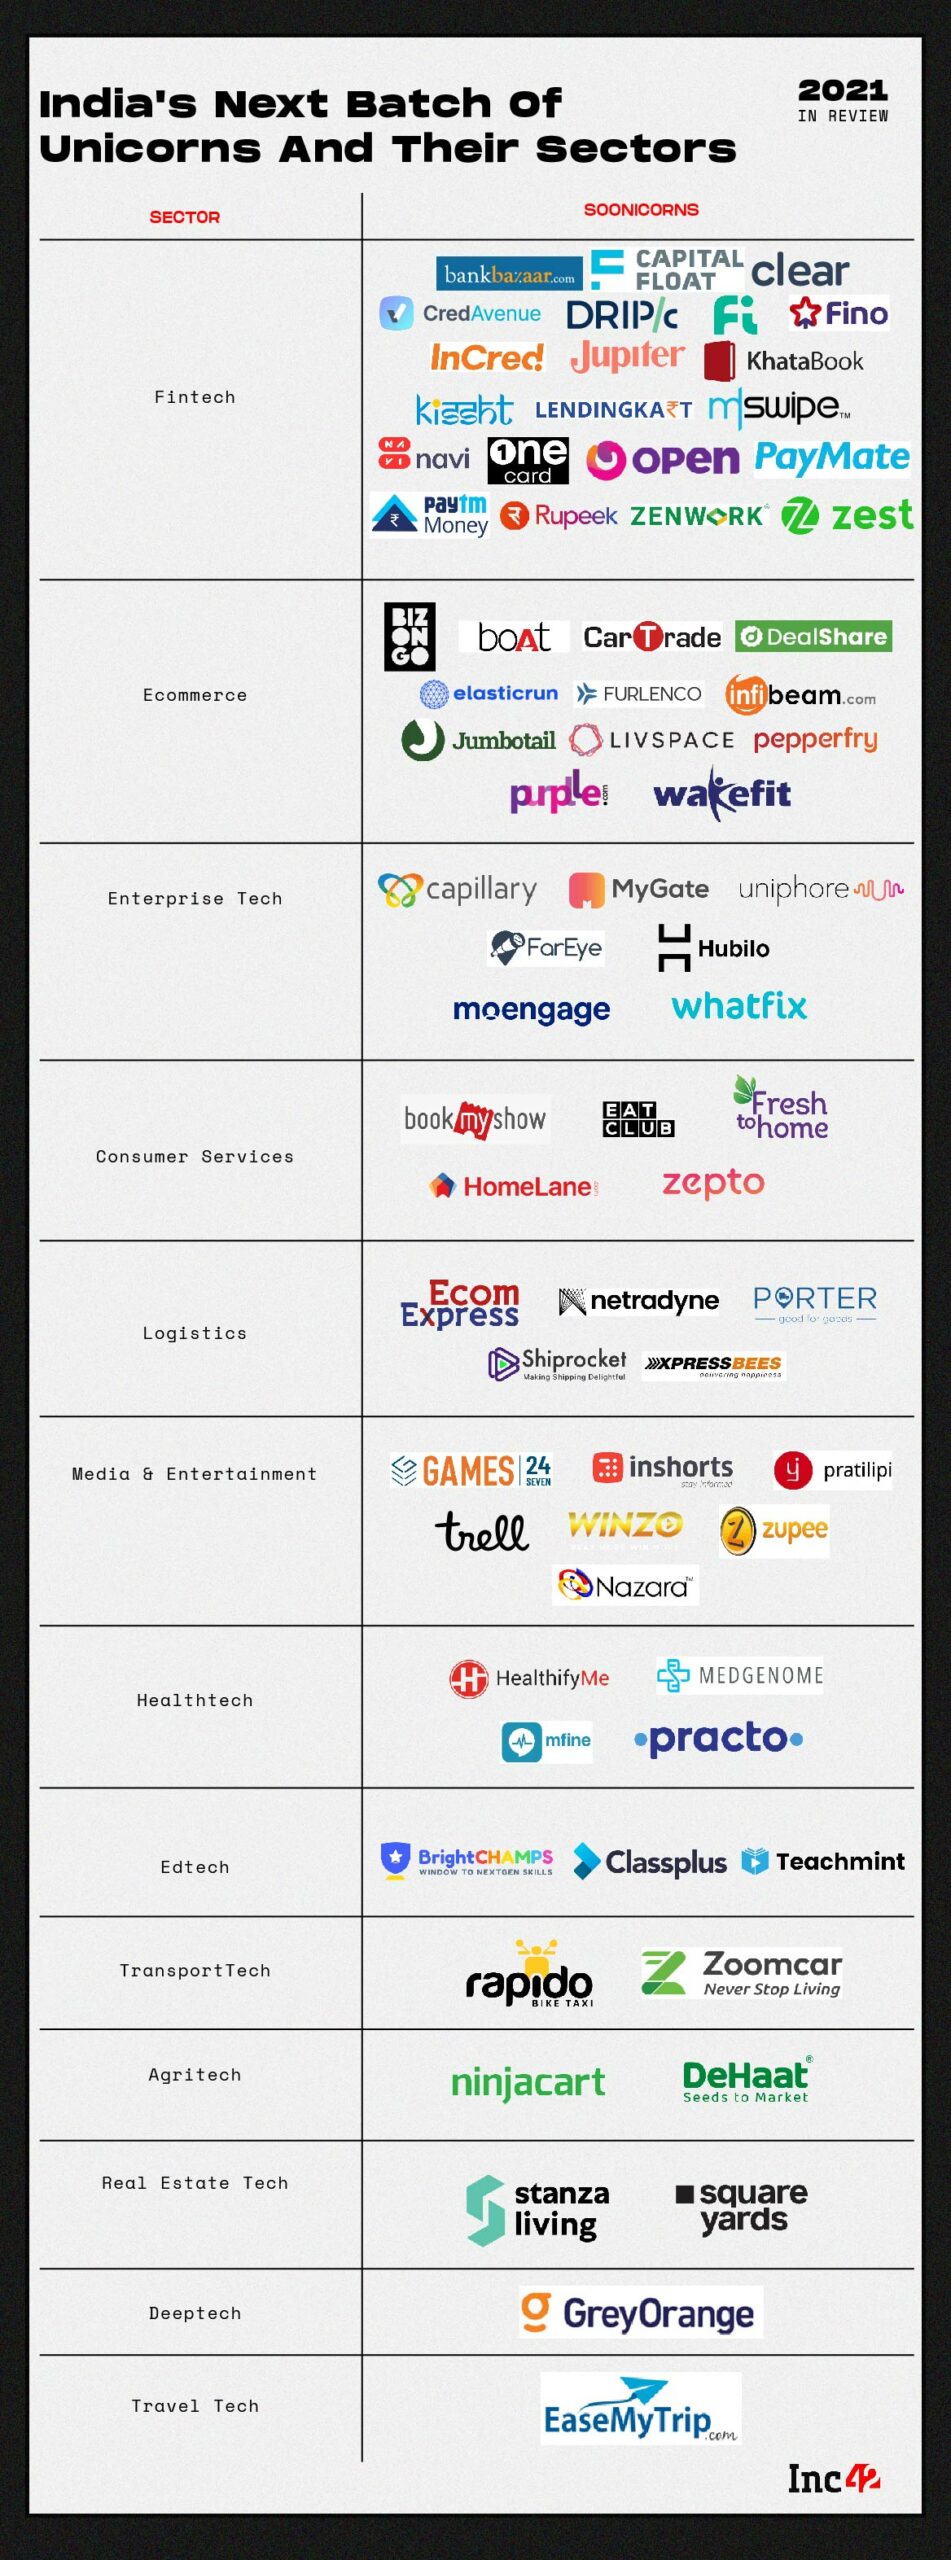 Soonicorn Startups In India By Sector